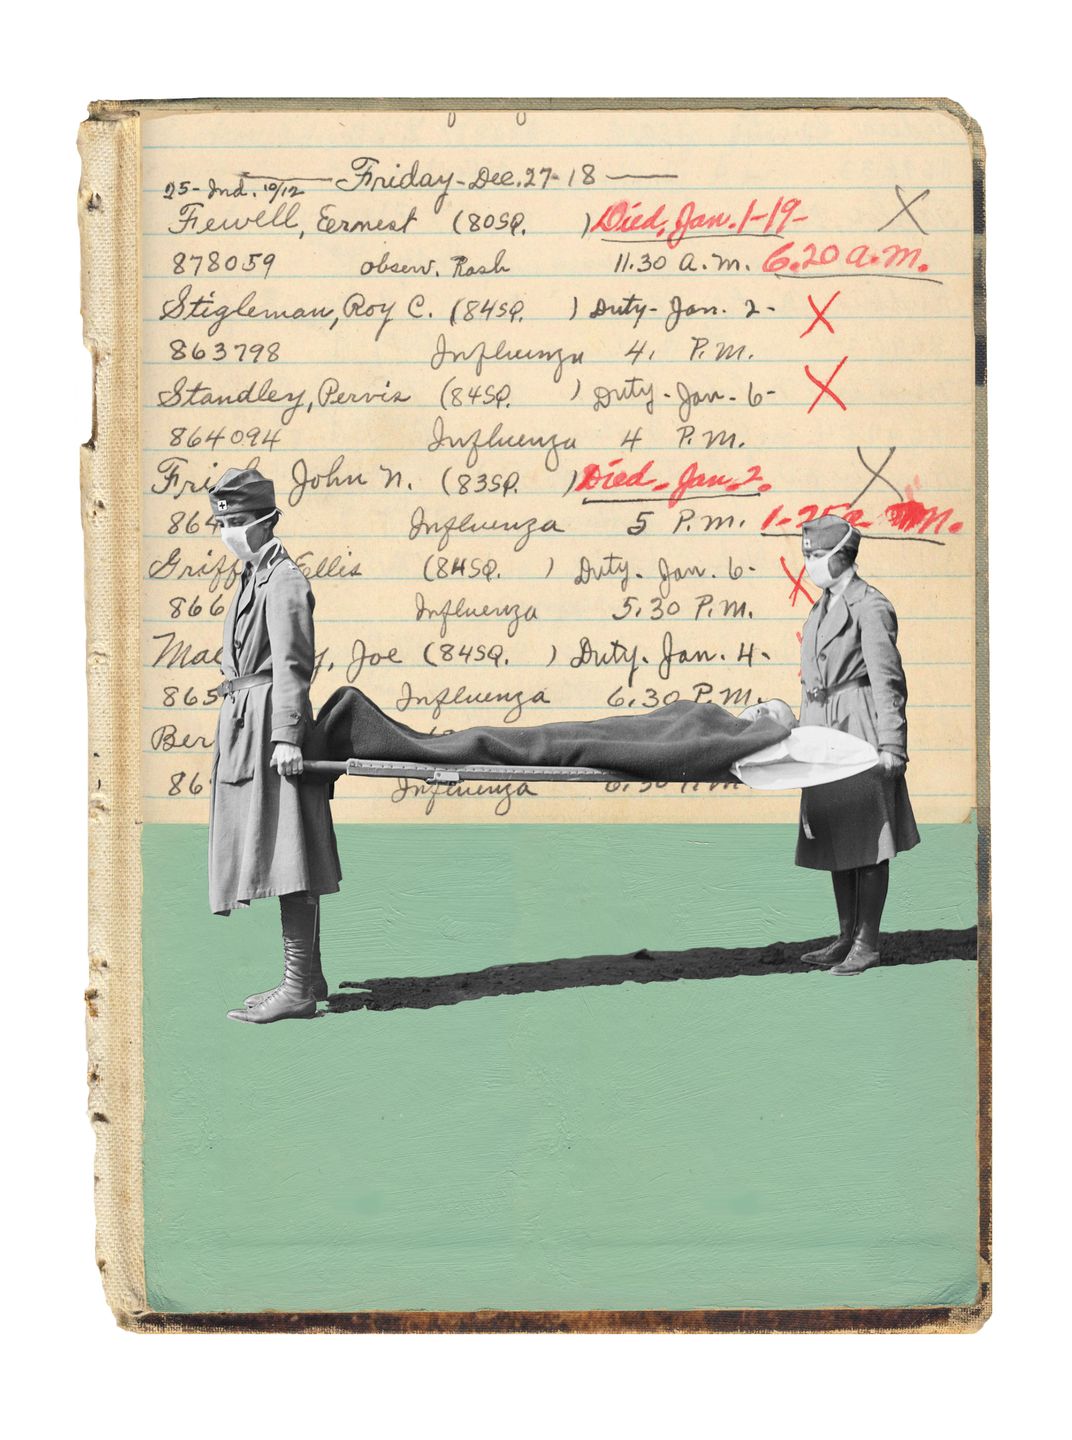 Red Cross workers carried a stretcher in 1918; names fill an Army hospital ledger.